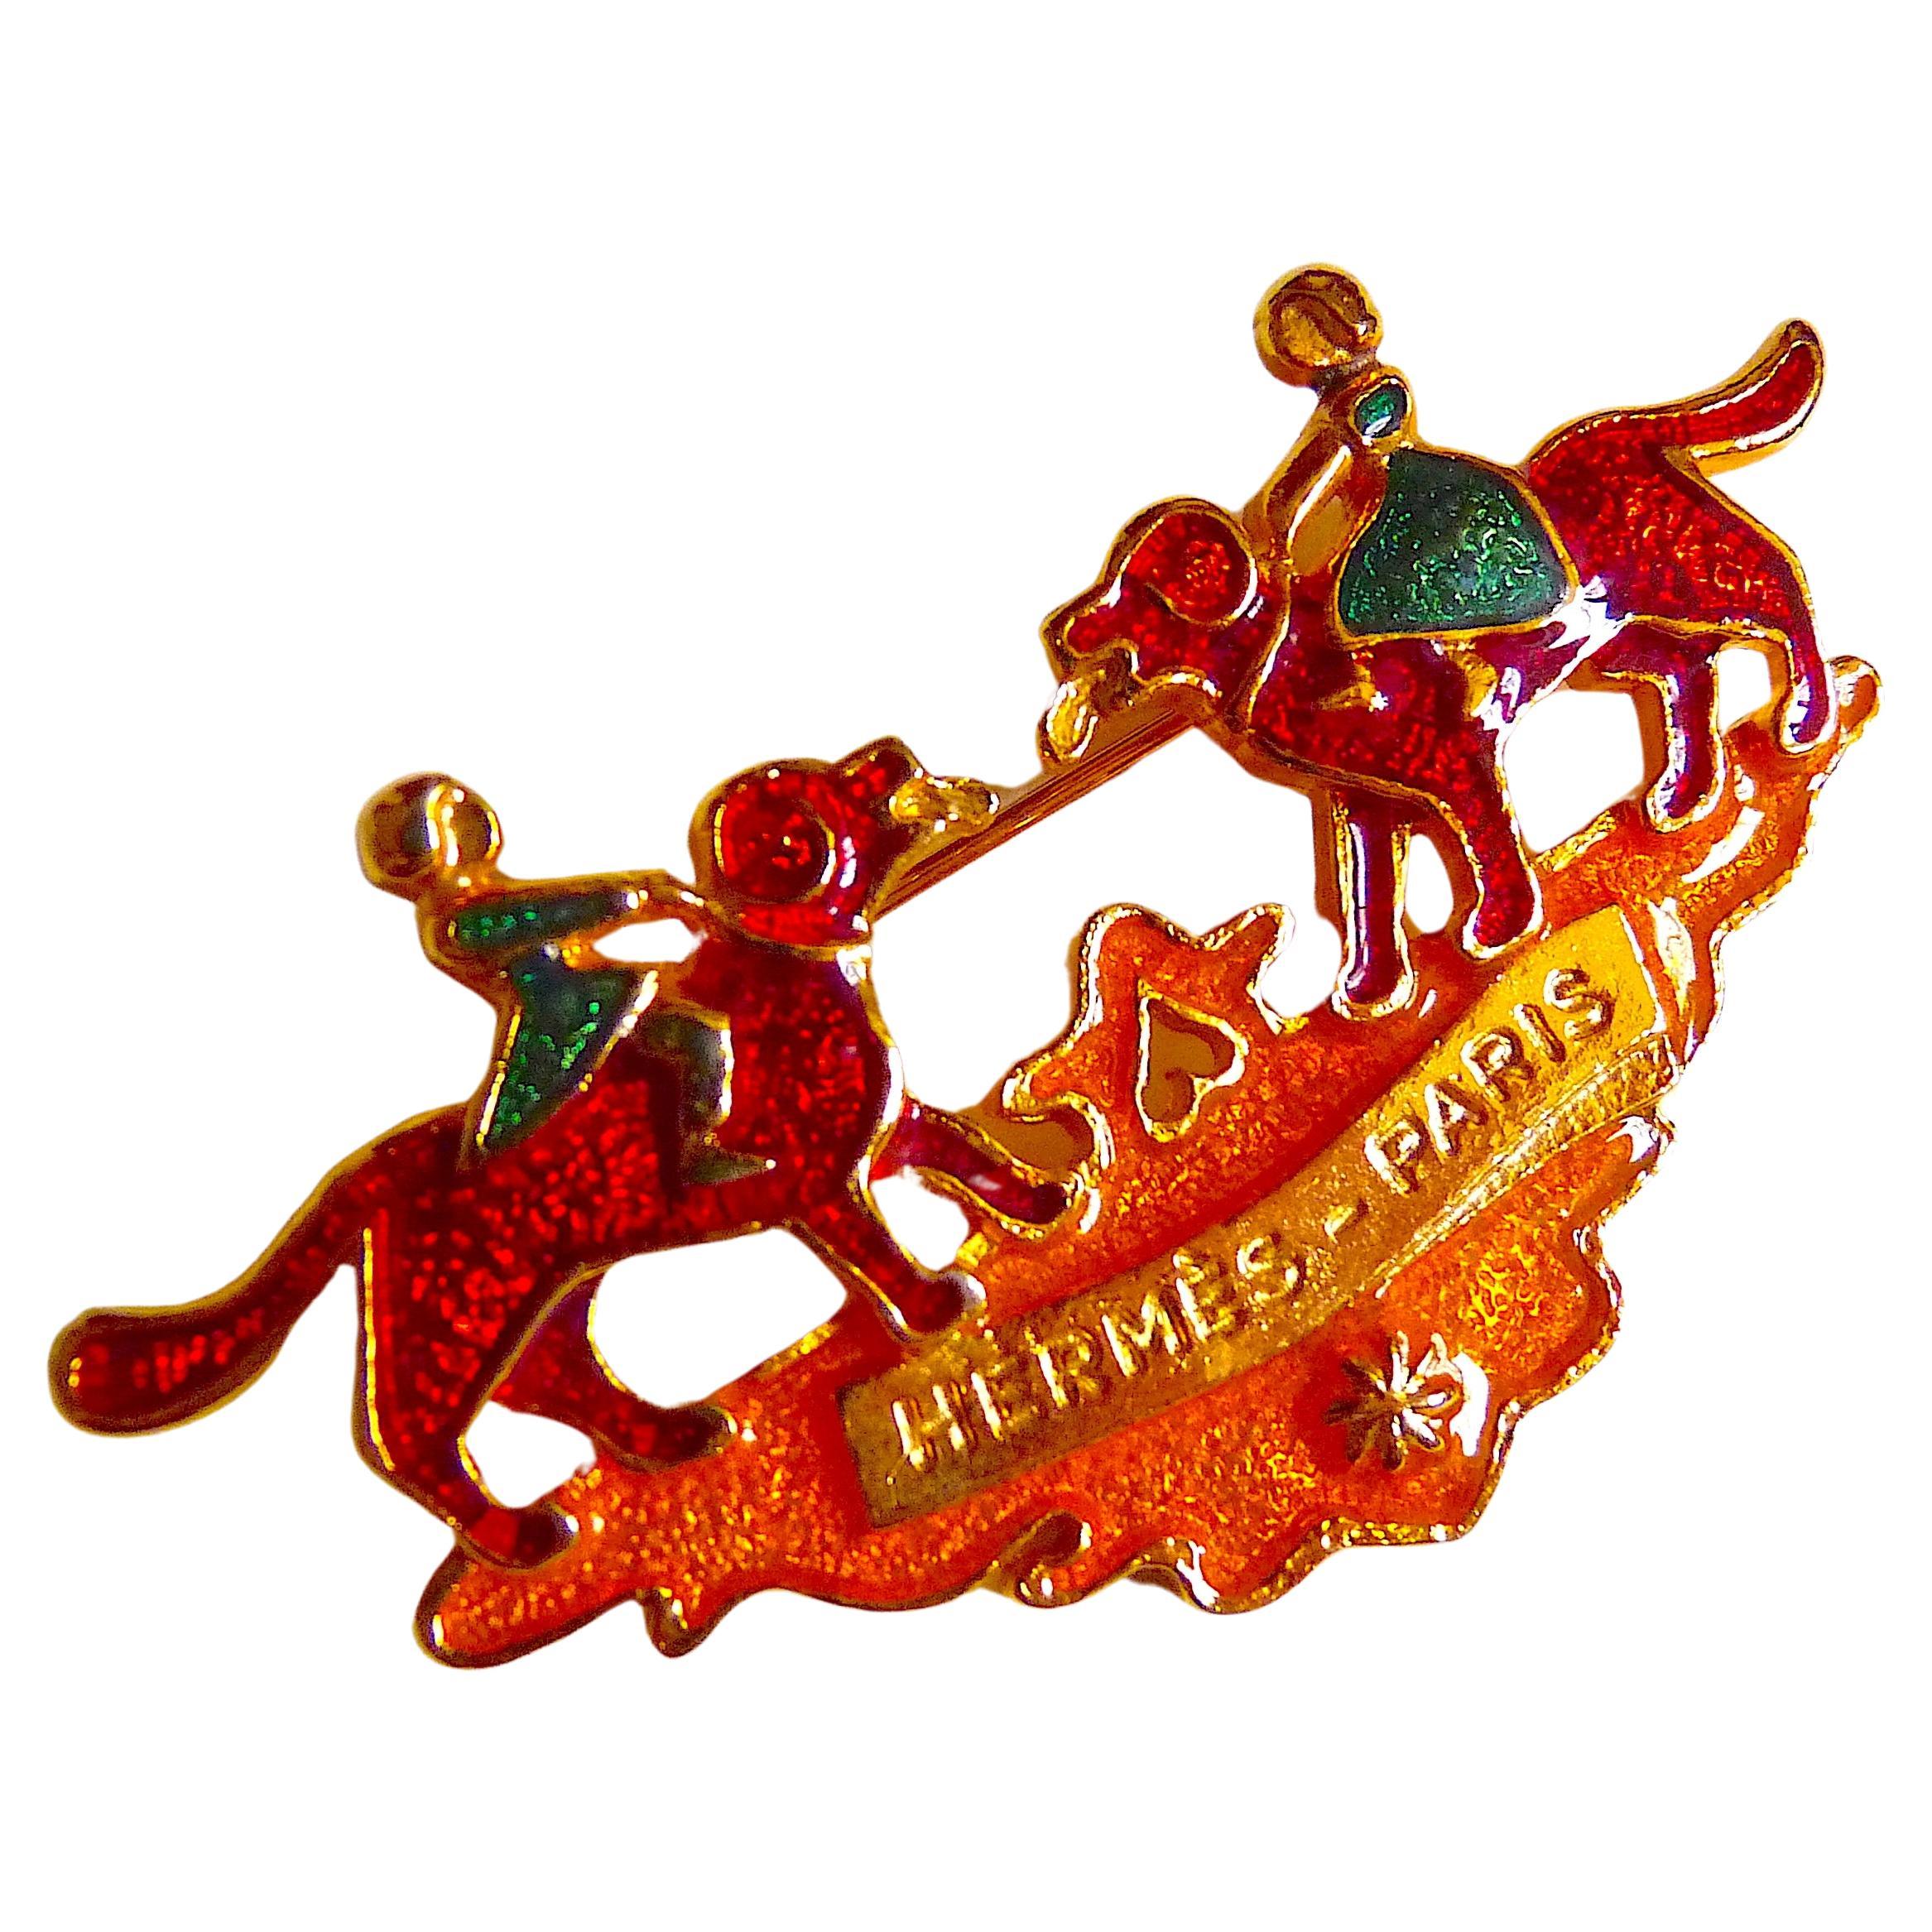 Hermes Brooch Early America Enamel and Gilt Metal, 1990s For Sale